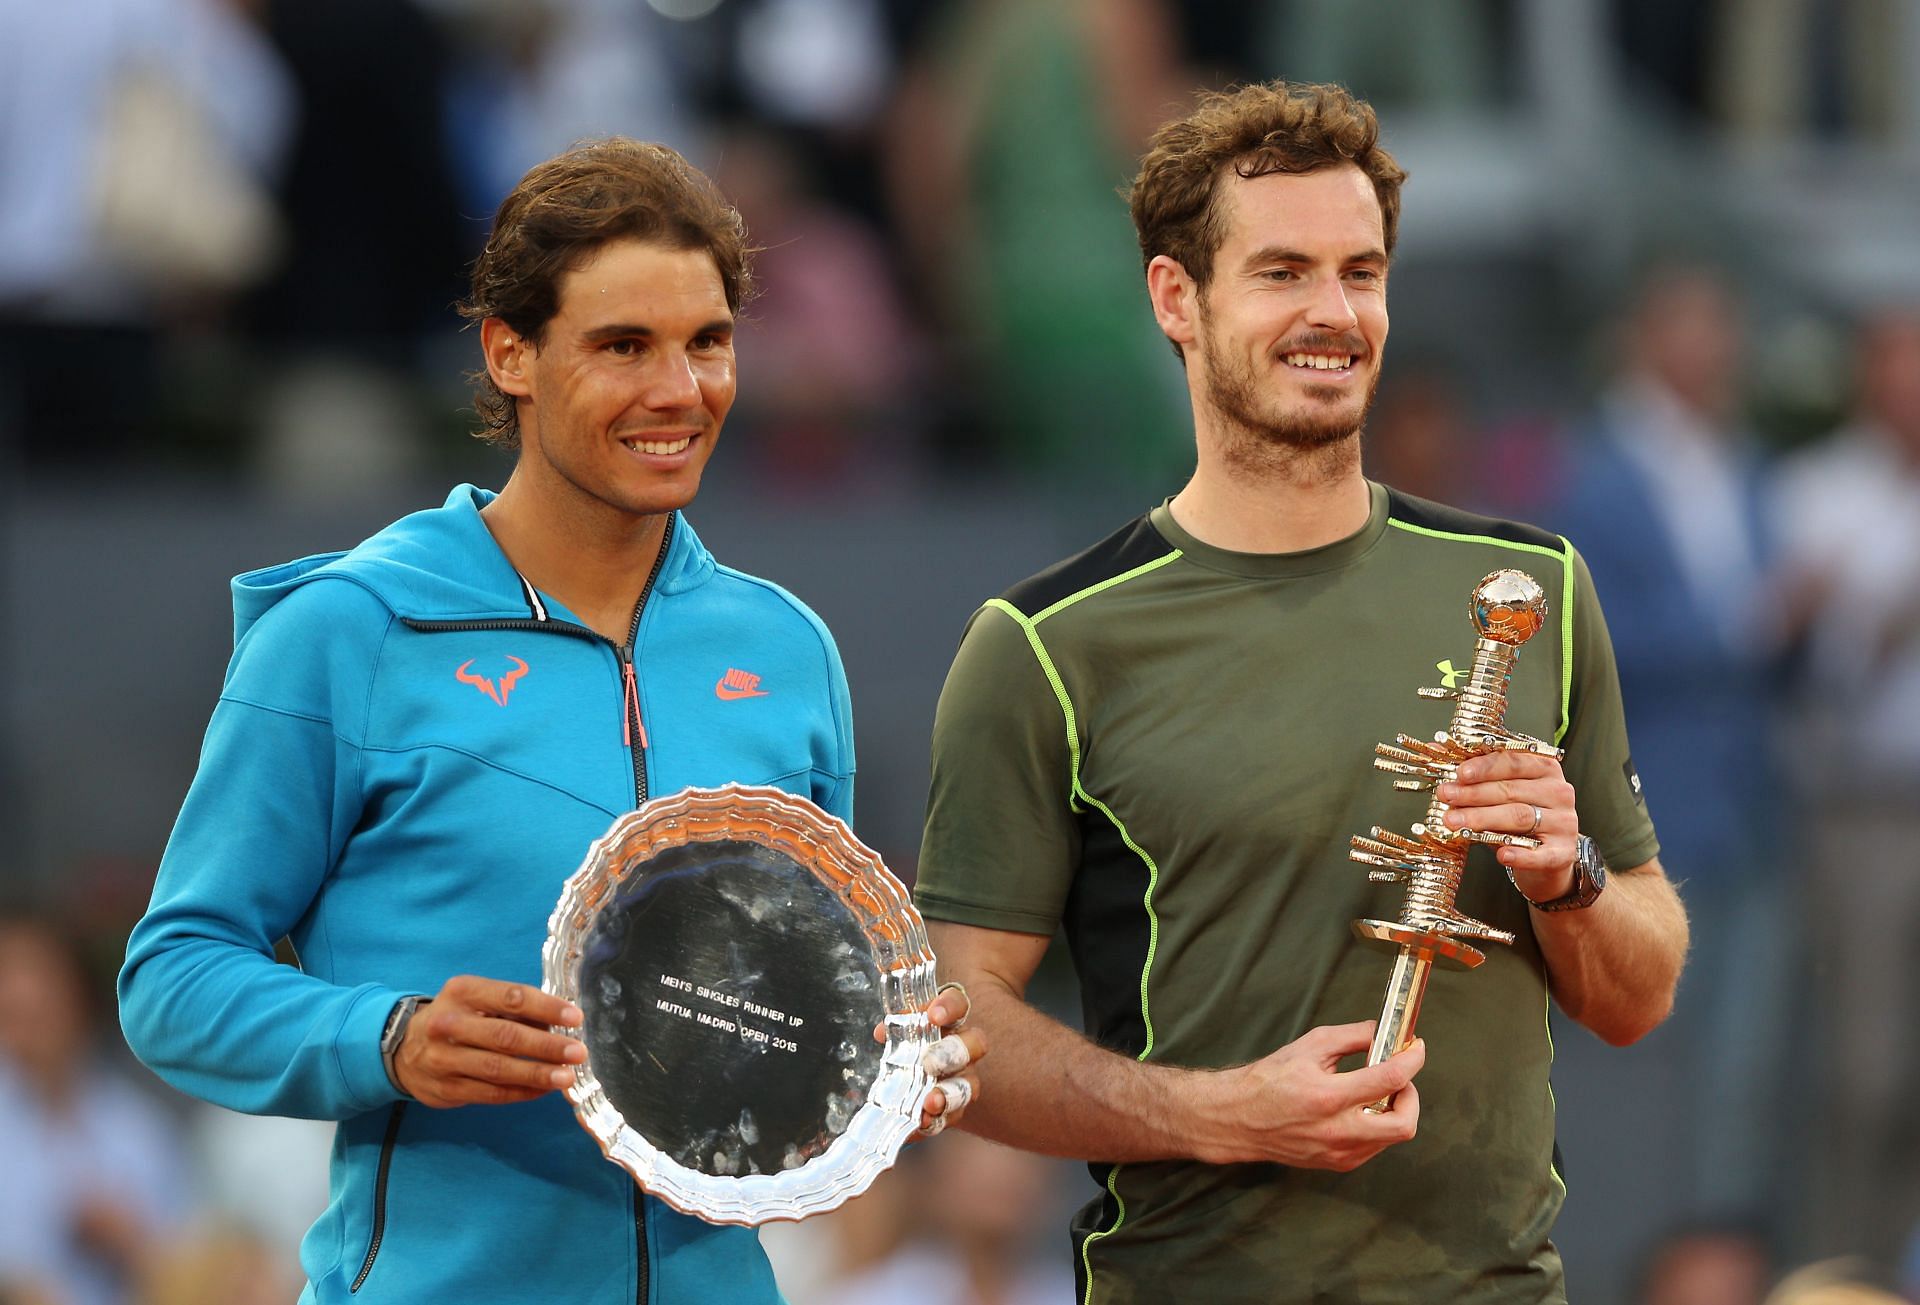 Andy Murray (R) picked Rafael Nadal (L) as the favorite for the French Open.